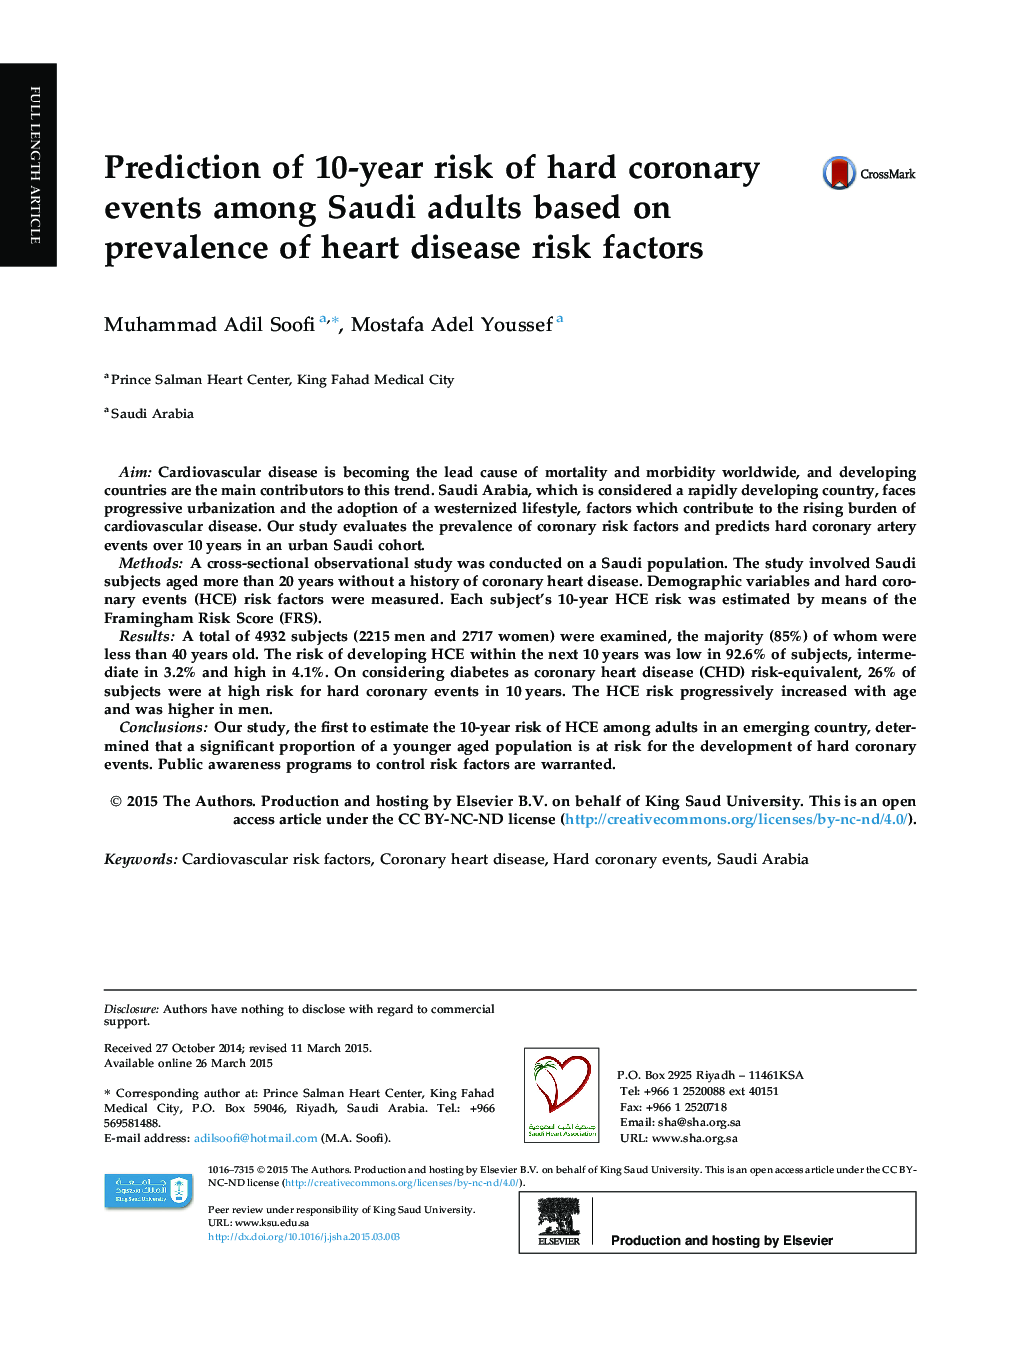 Prediction of 10-year risk of hard coronary events among Saudi adults based on prevalence of heart disease risk factors 